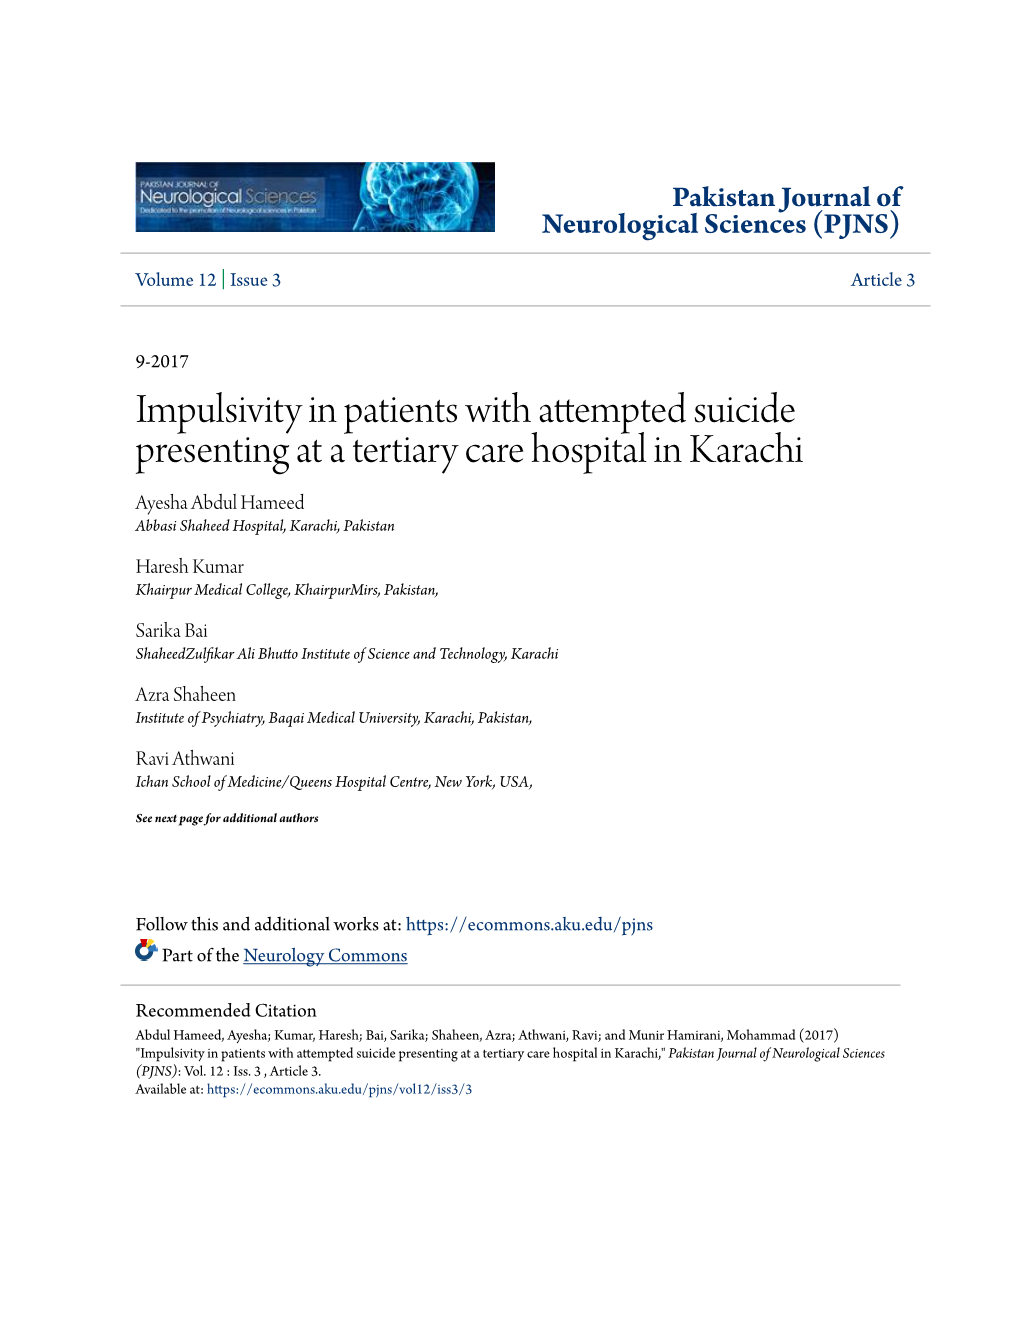 Impulsivity in Patients with Attempted Suicide Presenting at a Tertiary Care Hospital in Karachi Ayesha Abdul Hameed Abbasi Shaheed Hospital, Karachi, Pakistan